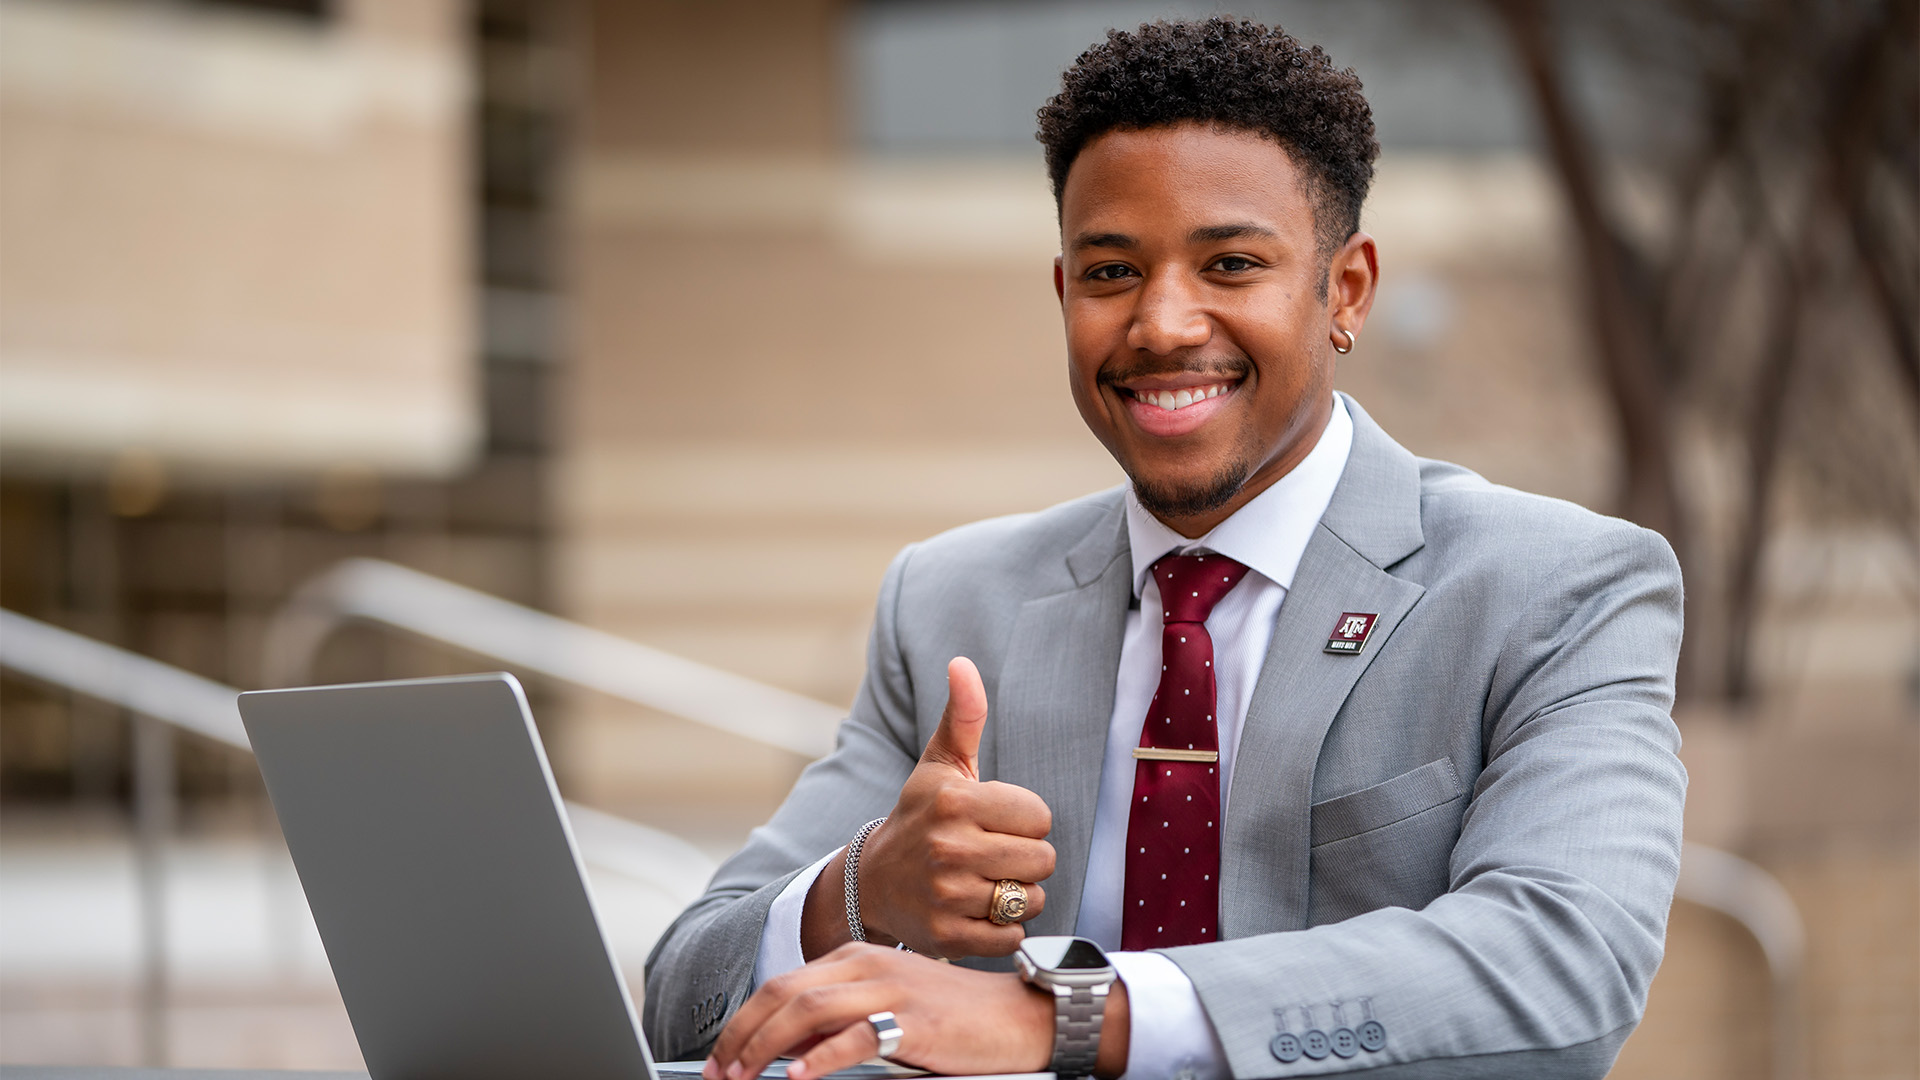 Business Student working on a laptop giving a thumbs up